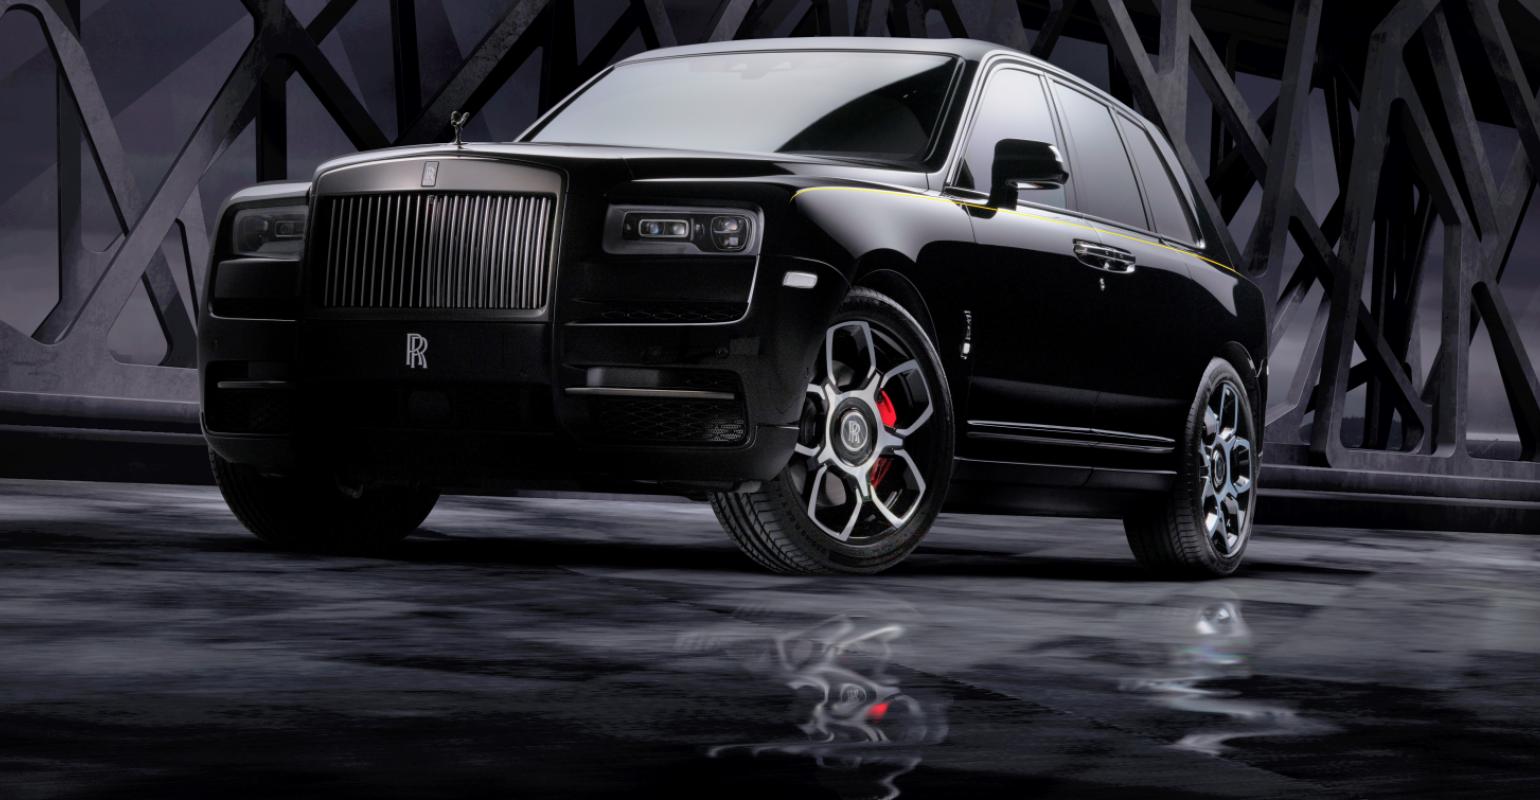 Twotone Rolls Royce Cullinan waiting in line with JayZs evening ride  outside Roc Nation offices  rspotted